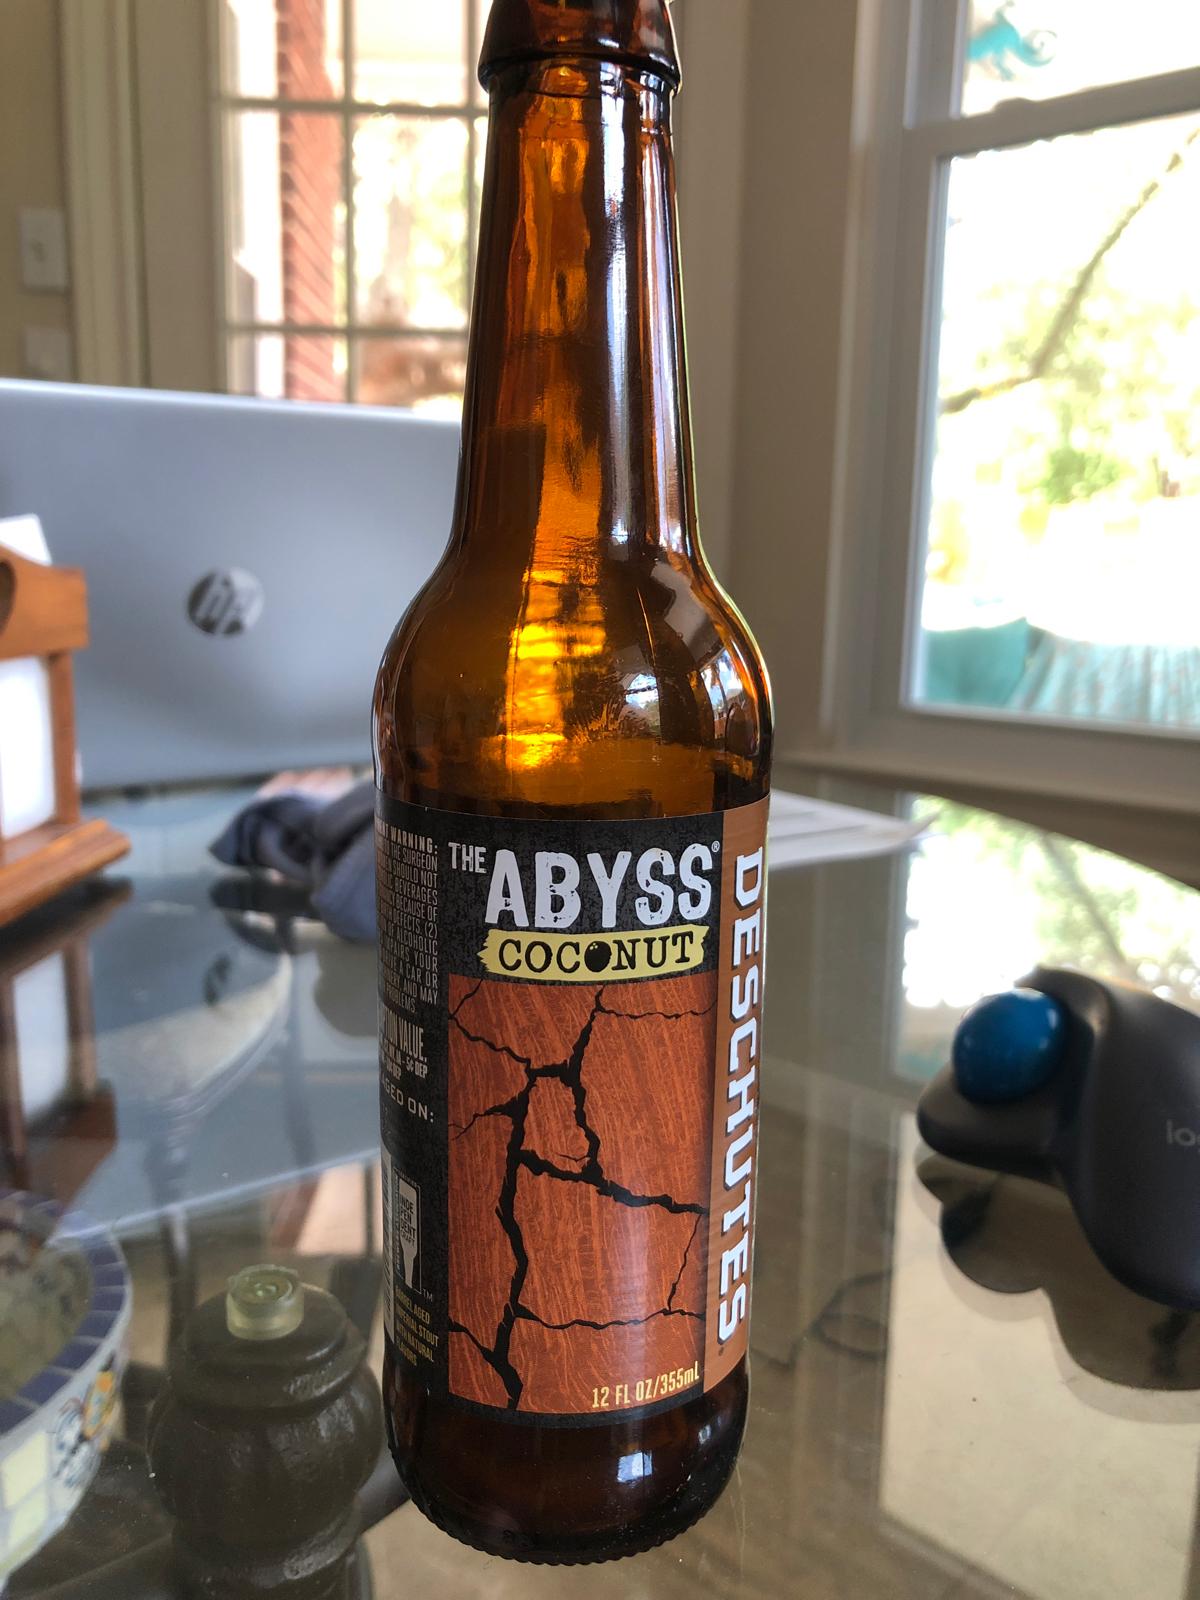 The Abyss with Coconut